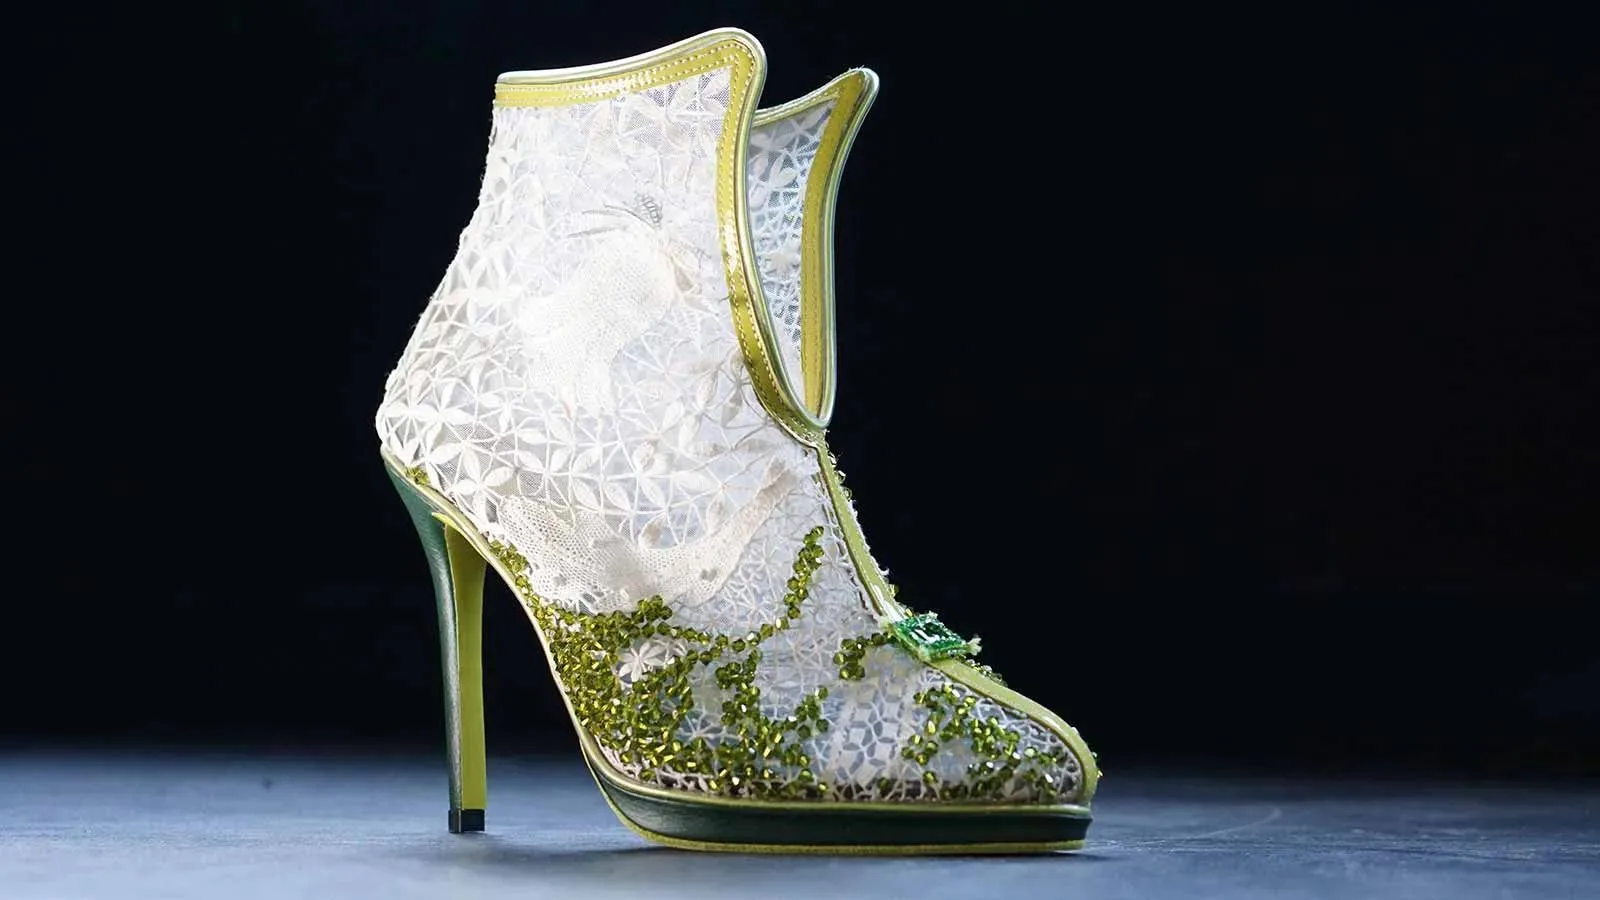 Heeled shoe in white lace and green pearls in Le Puy-en-Velay in Haute-Loire